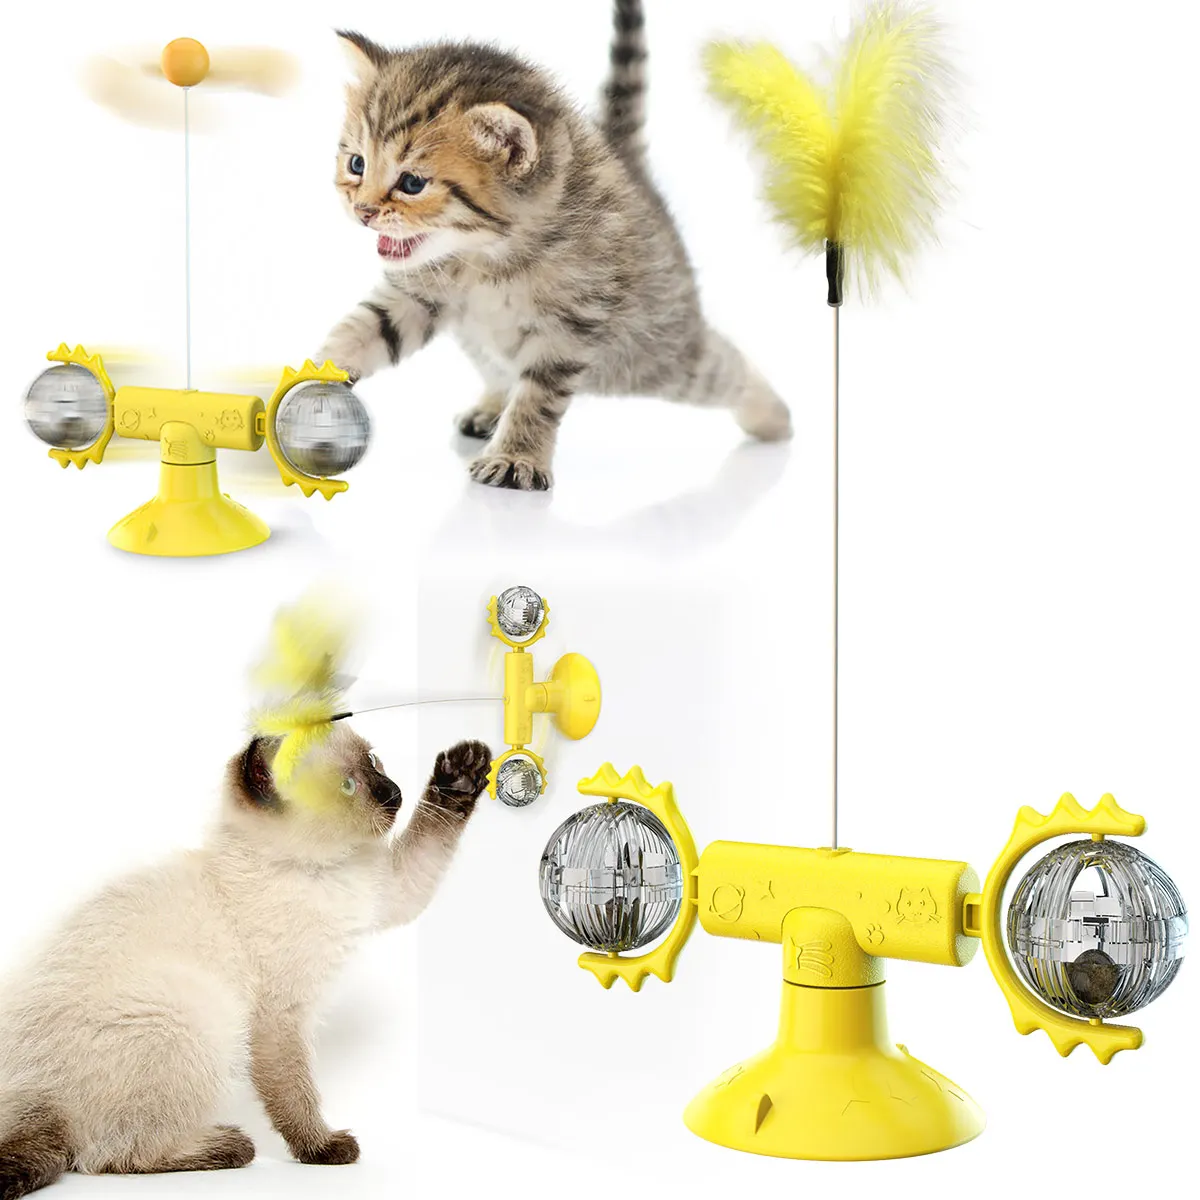 

Hot Sale Pet Toy Feather Windmill Tease Stick Factory Direct Sales Of New Cat Turntable Toys With Cheap Price, Picture showed